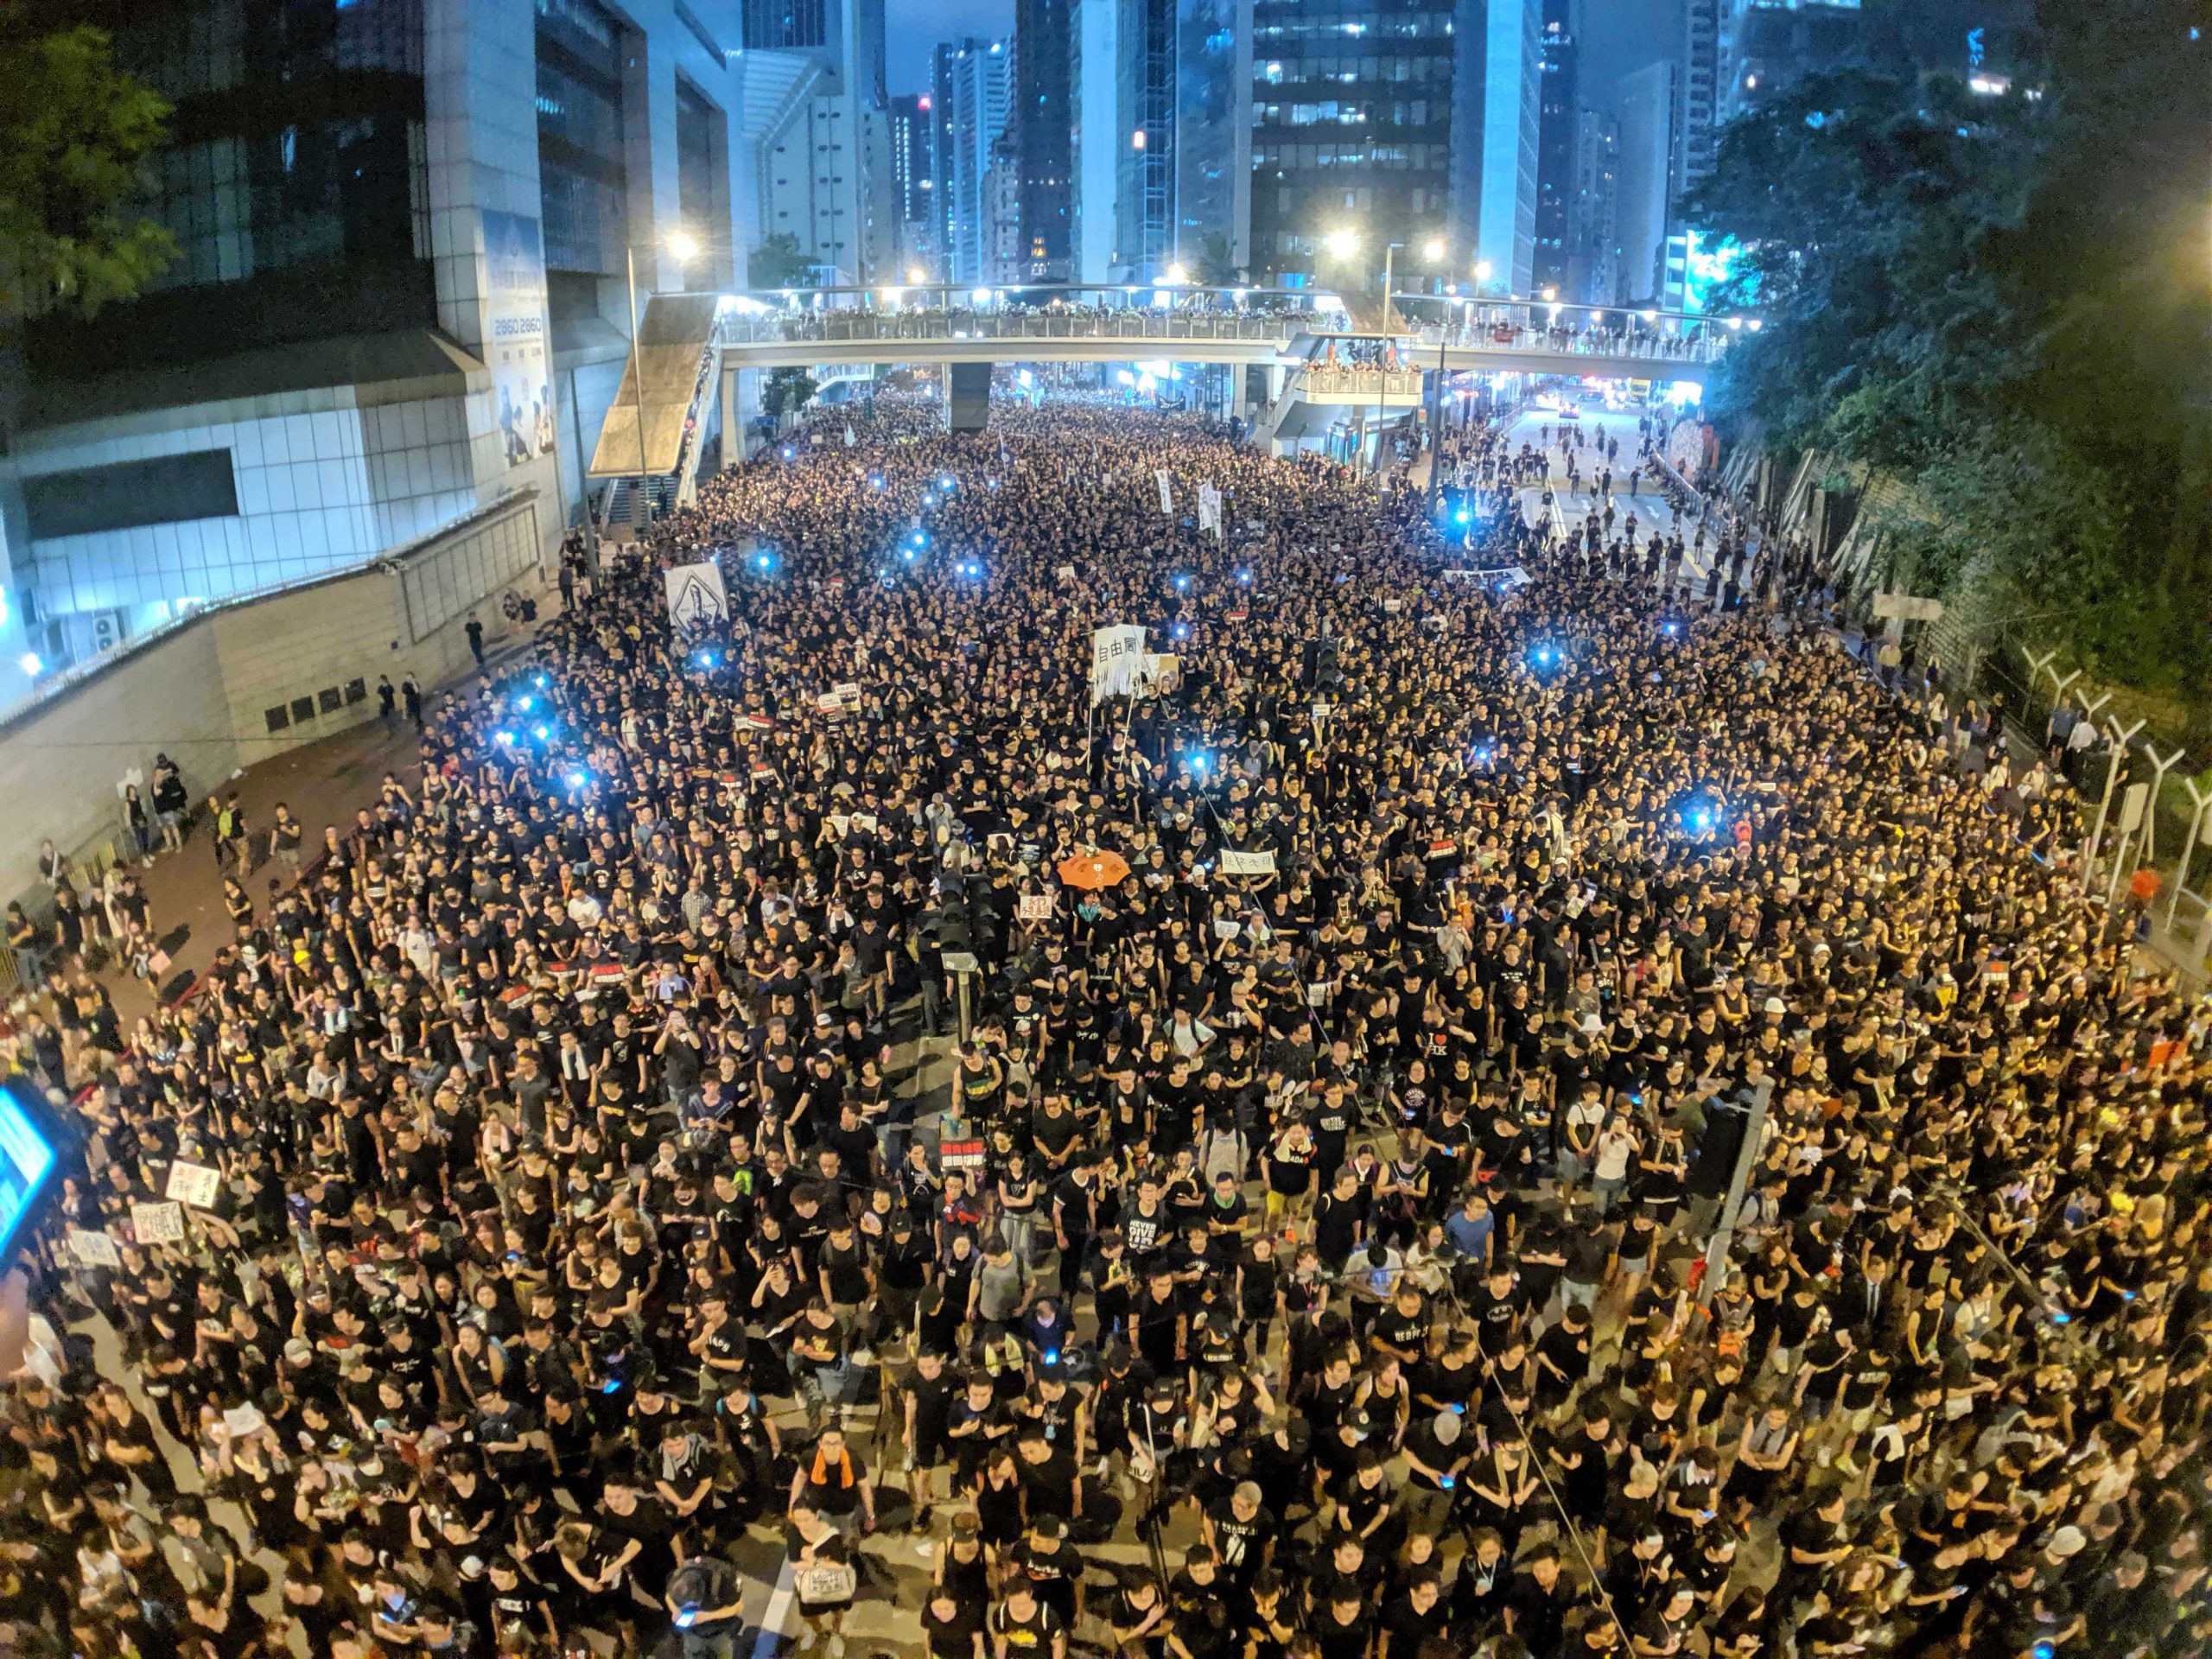 Hong Kong anti-extradition law protest on 16 June